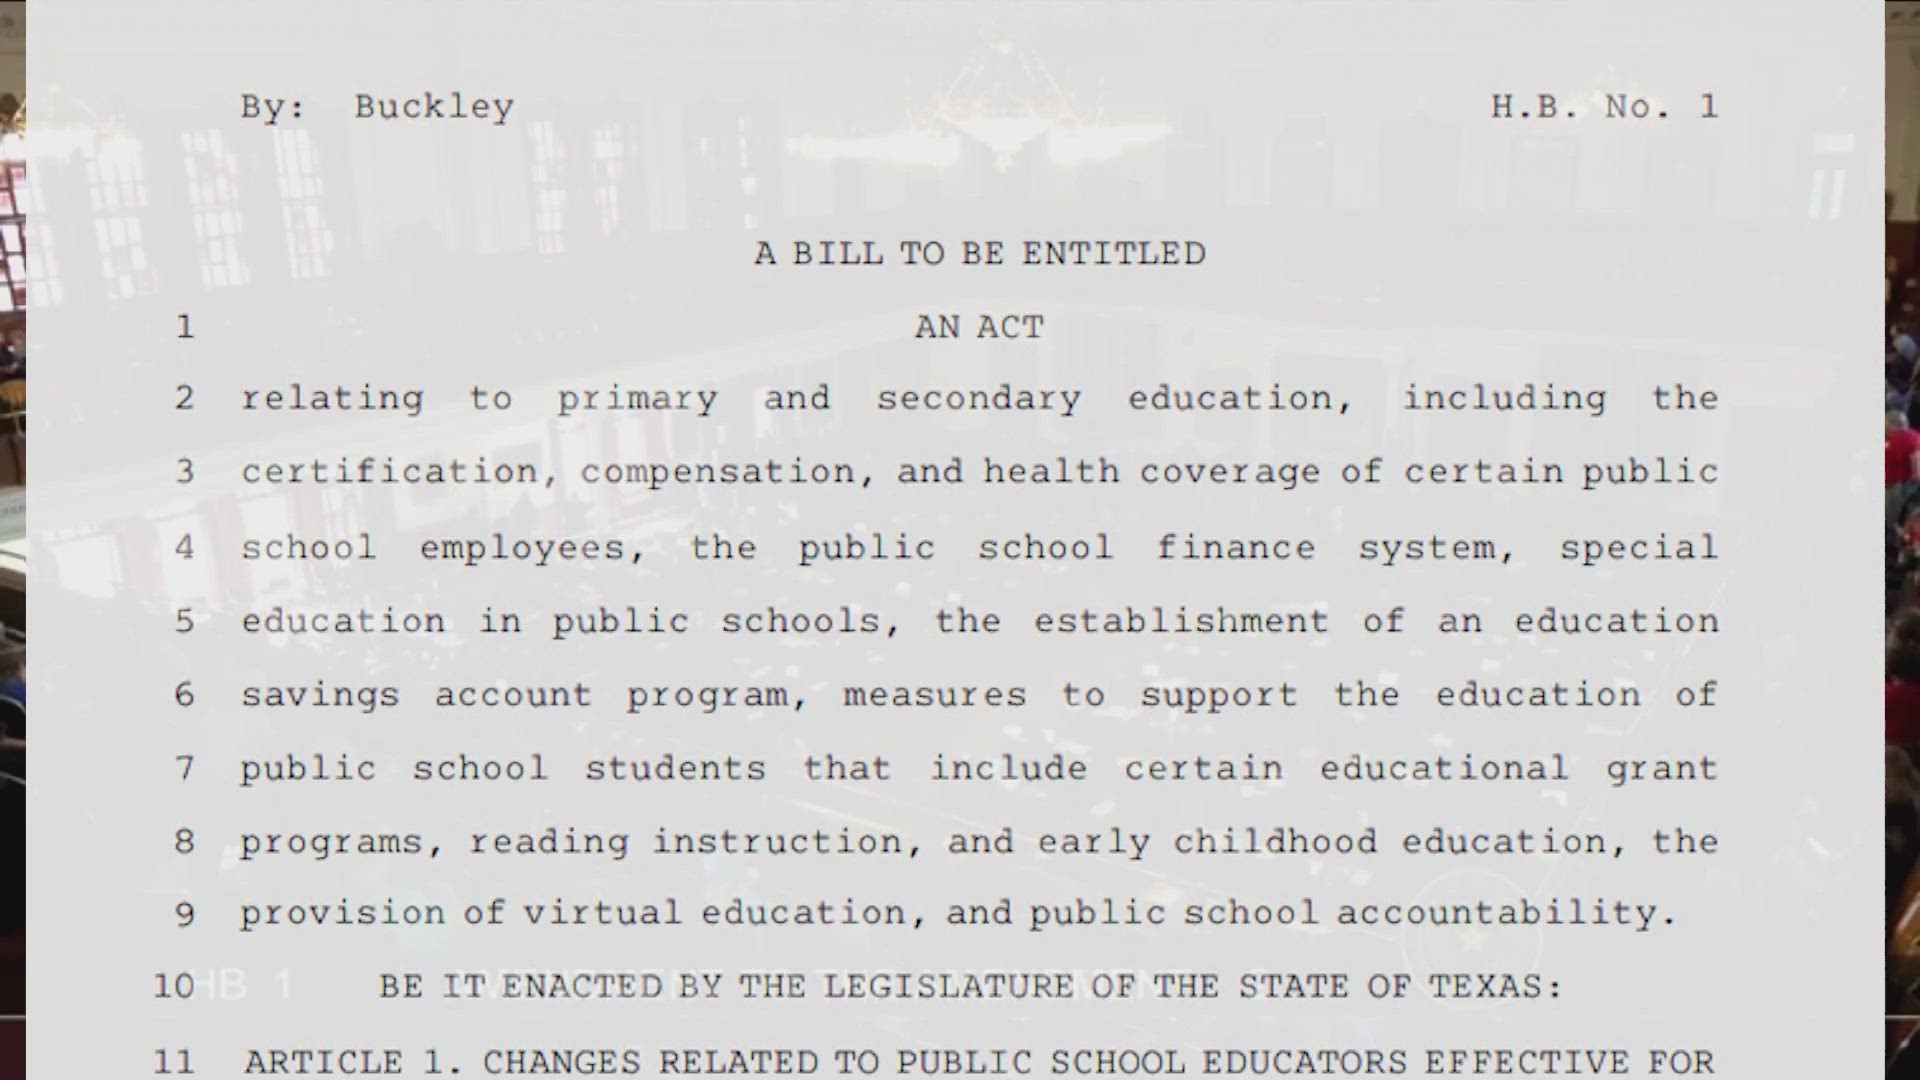 Governor Greg Abbott has said he would veto the bill if it does not include vouchers, his top legislative priority this year.